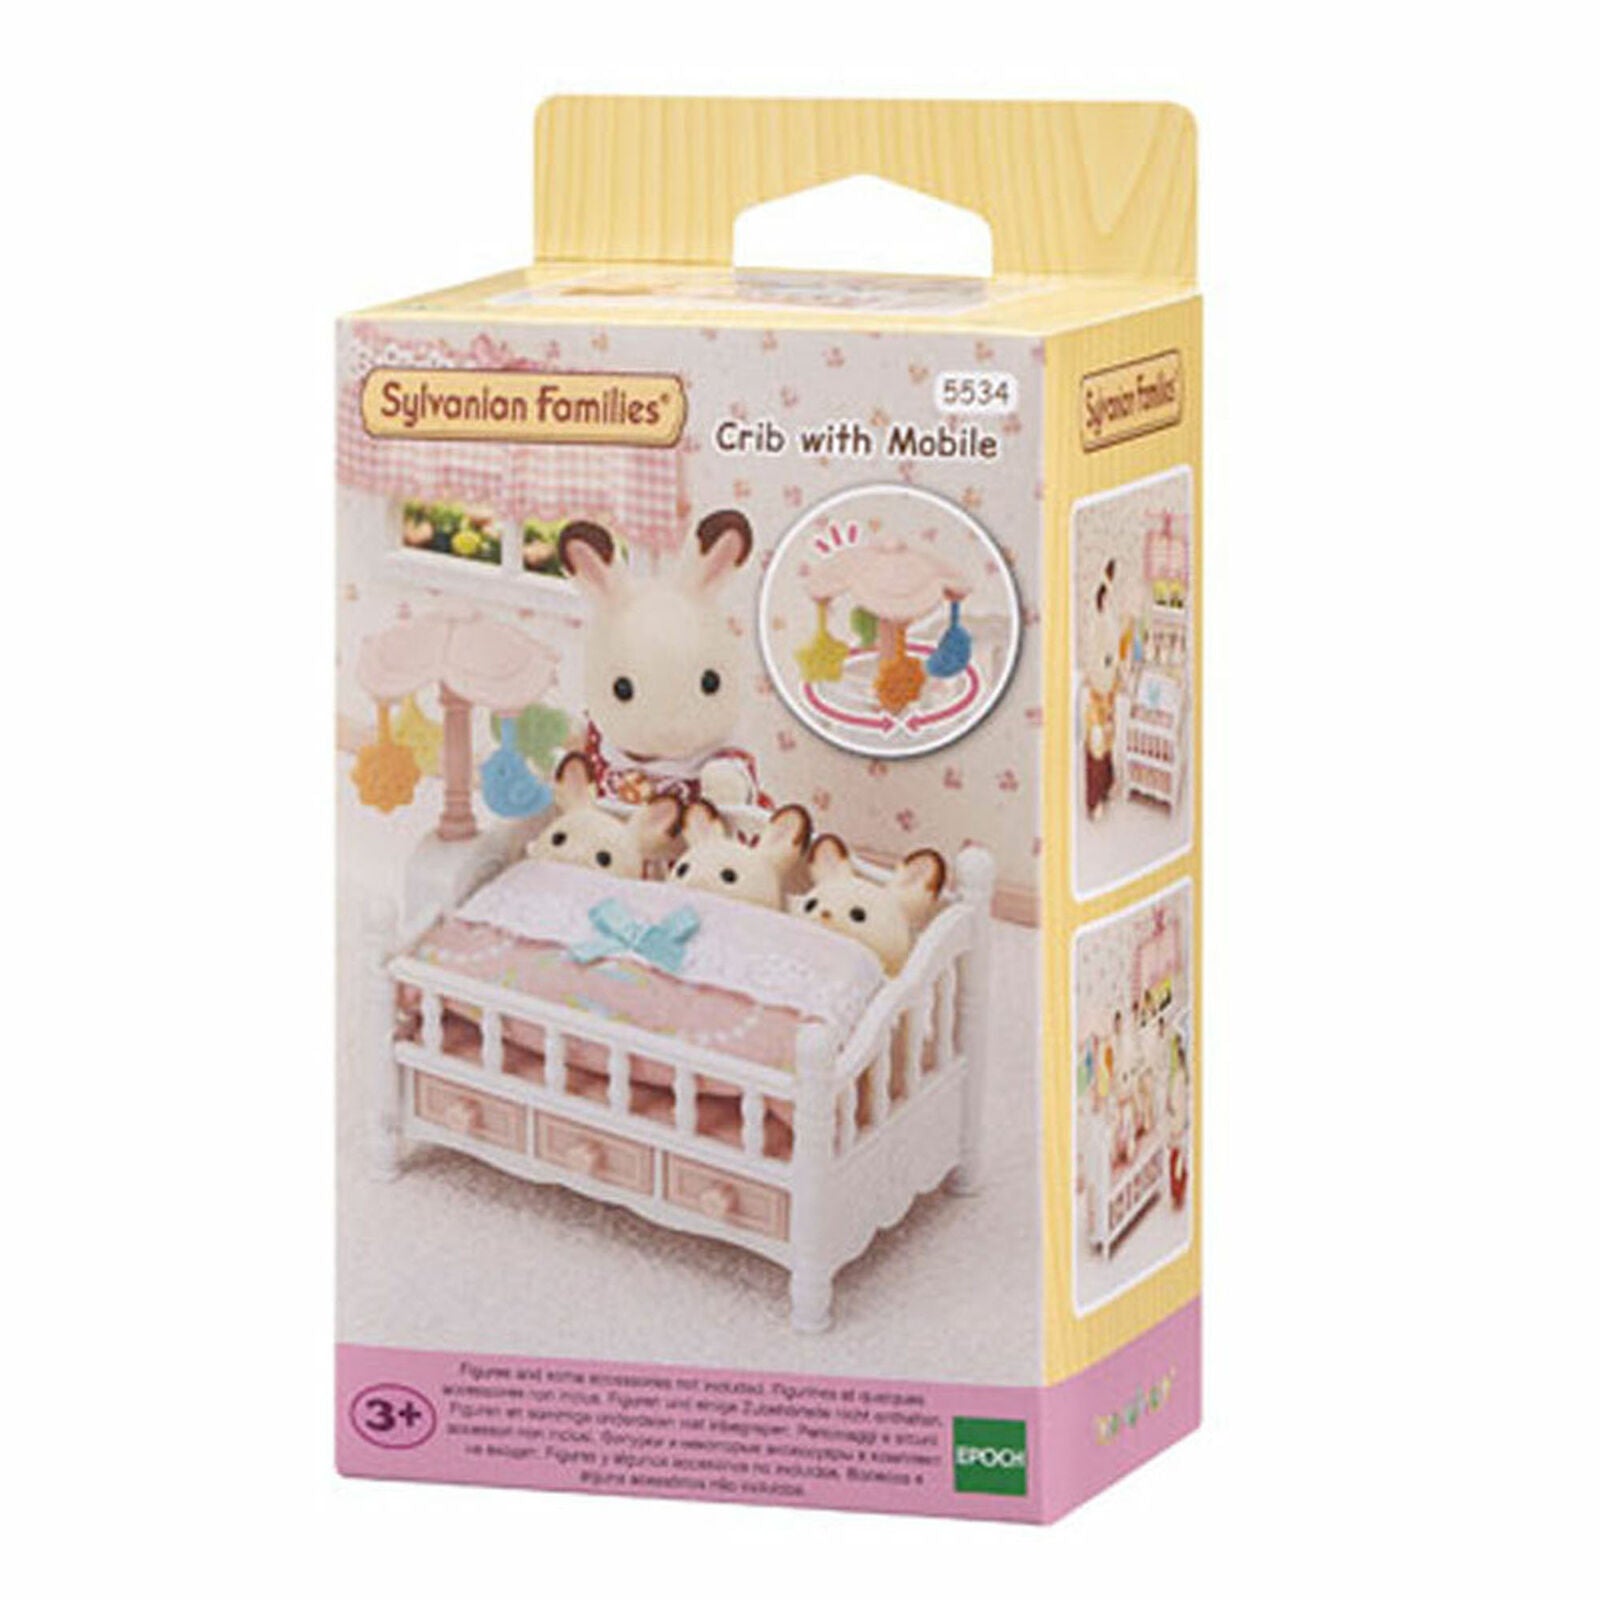 Sylvanian Families Triplets Crib with Mobile & Accessories 5534 Role Play Age 3+